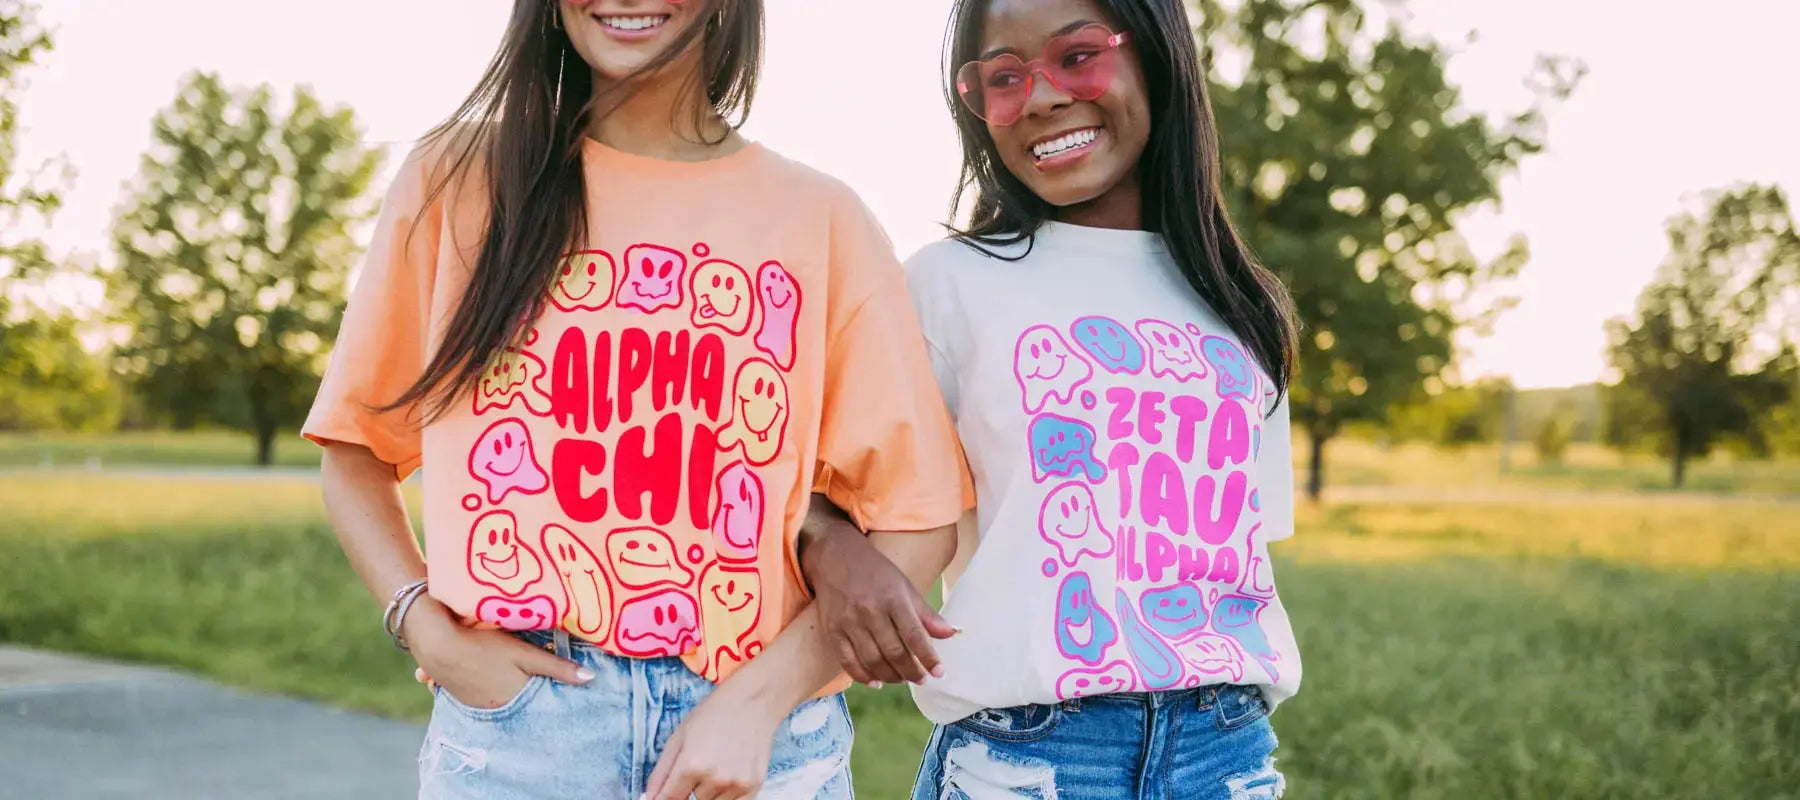 Spring vs. Fall Sorority Recruitment: What's the Difference?